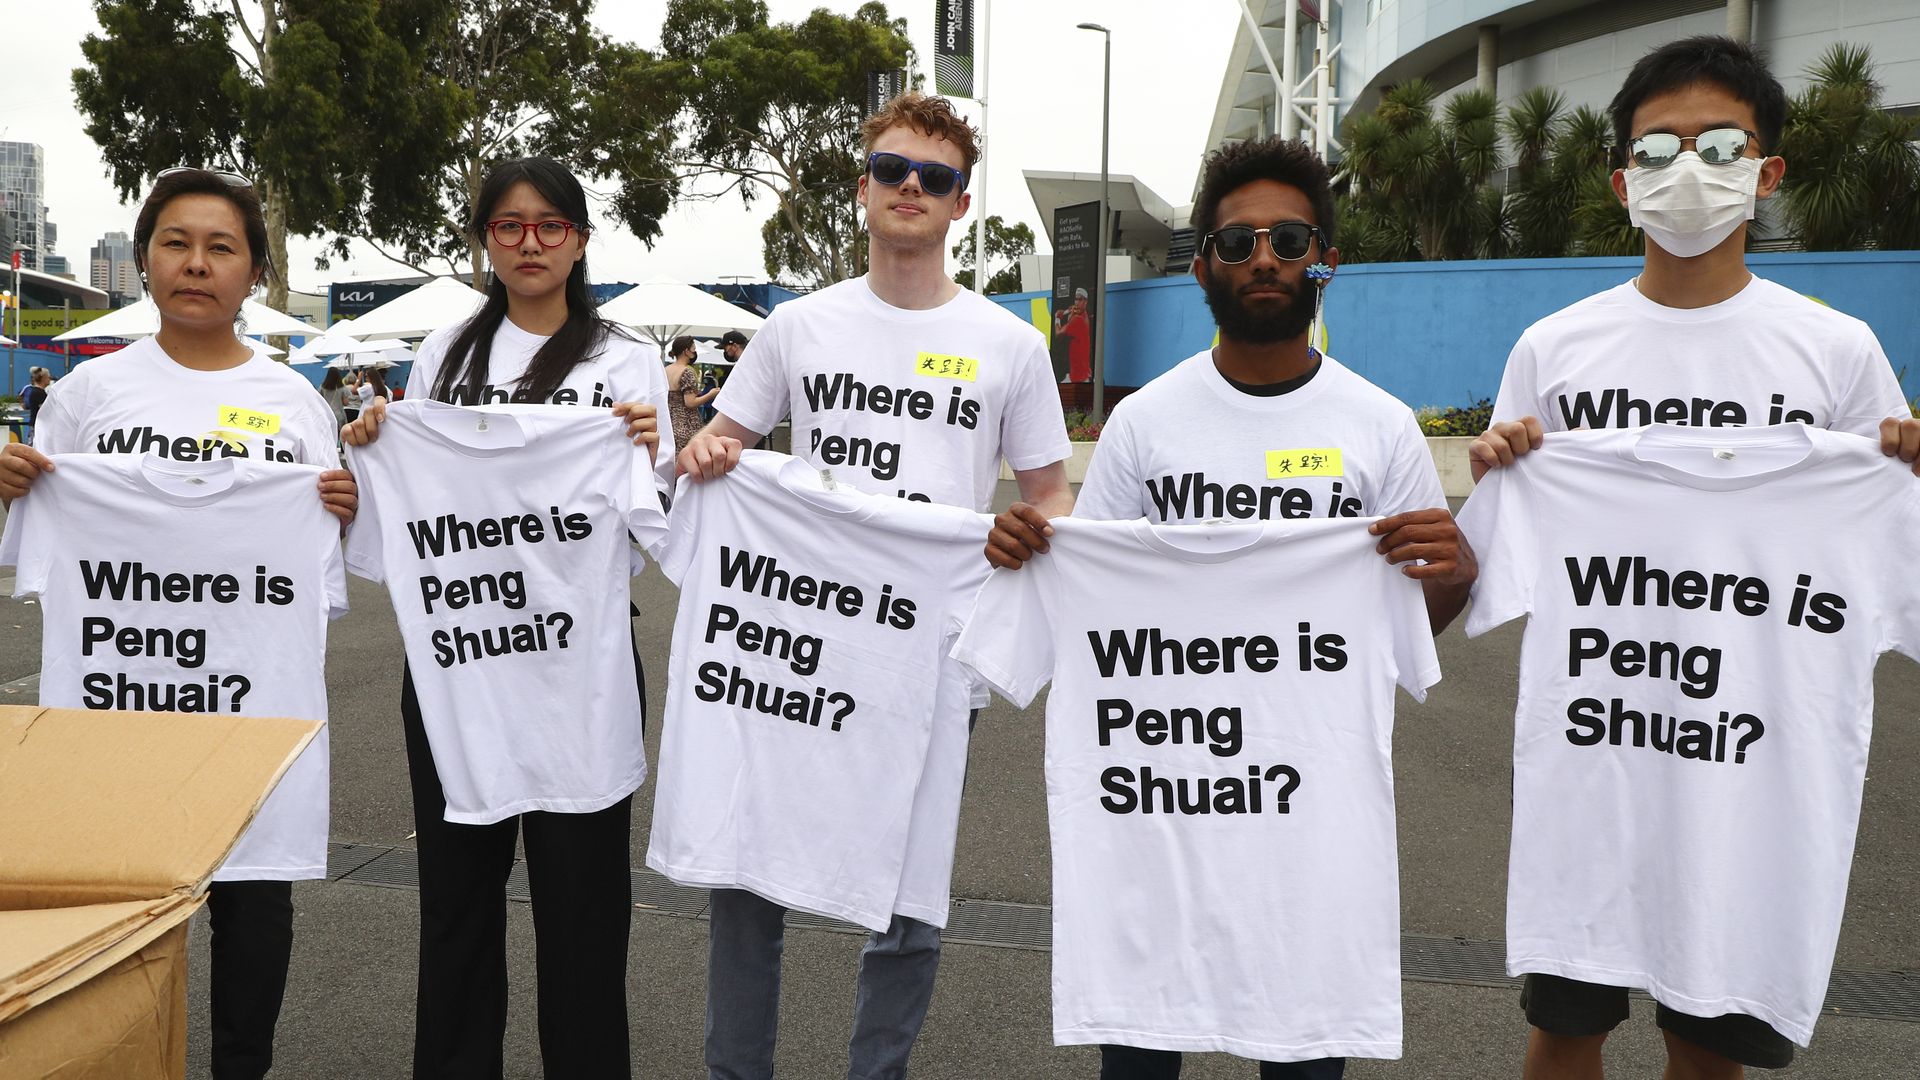 Protesters holding "Where is Peng Shuai?" t shirts